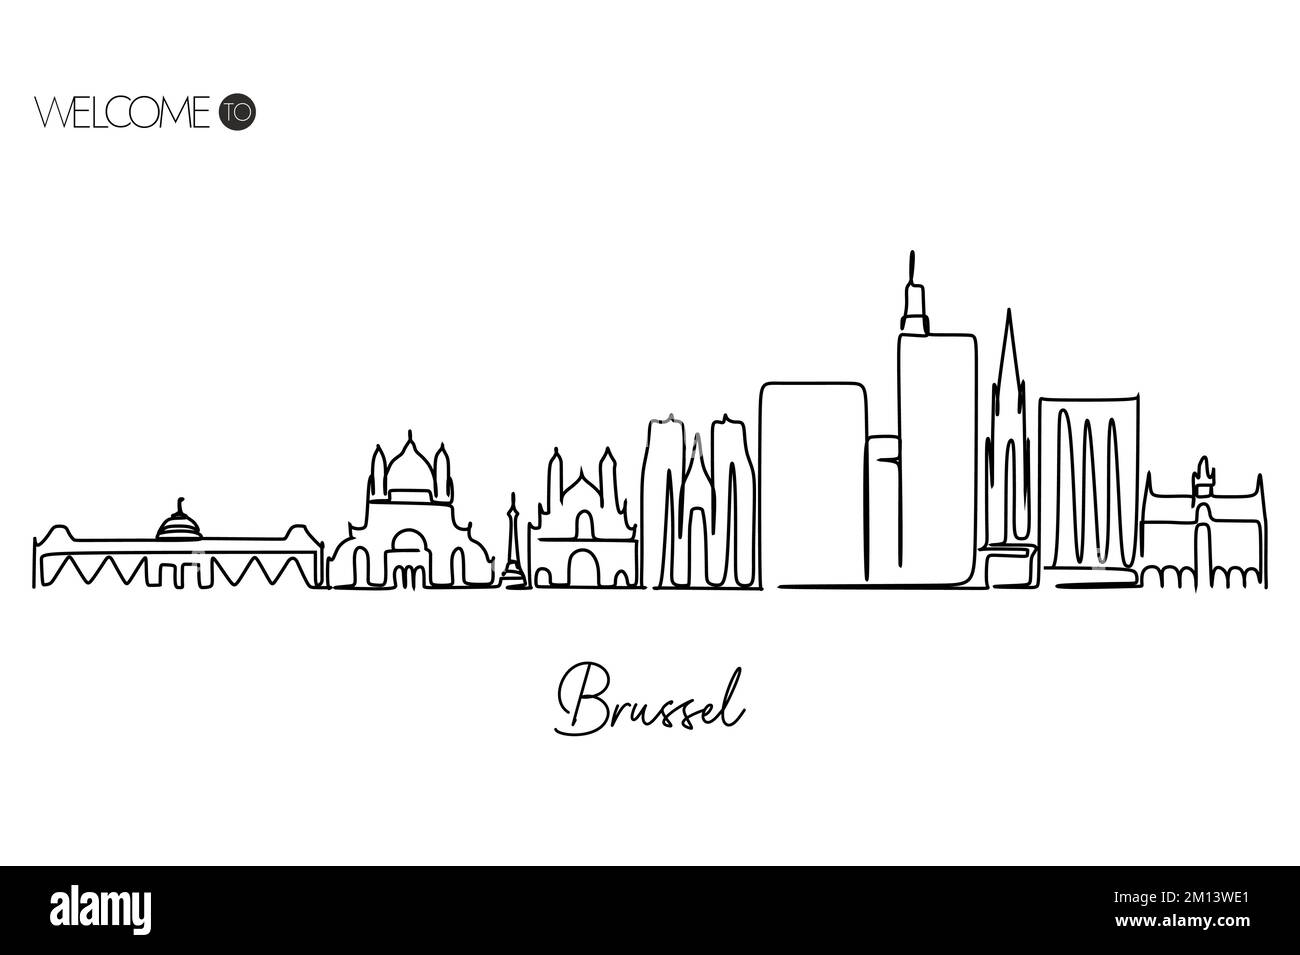 Brussel skyline line drawing World Famous tourism destination. Simple hand drawn style design for travel and tourism promotion campaign Stock Vector